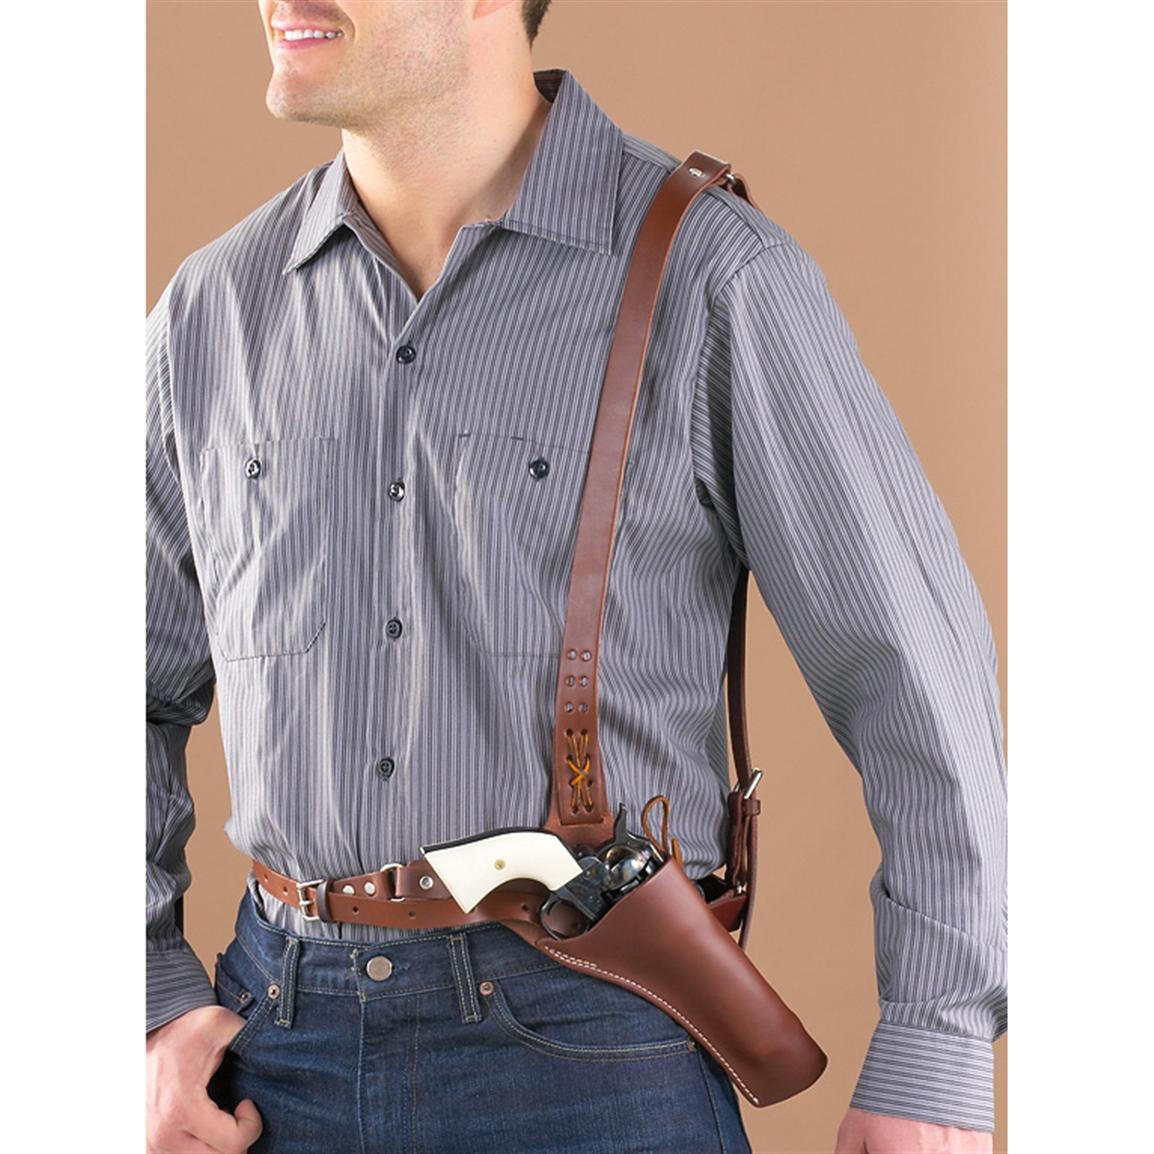 The Huckleberry Holster - 142780, Holsters at Sportsman's Guide